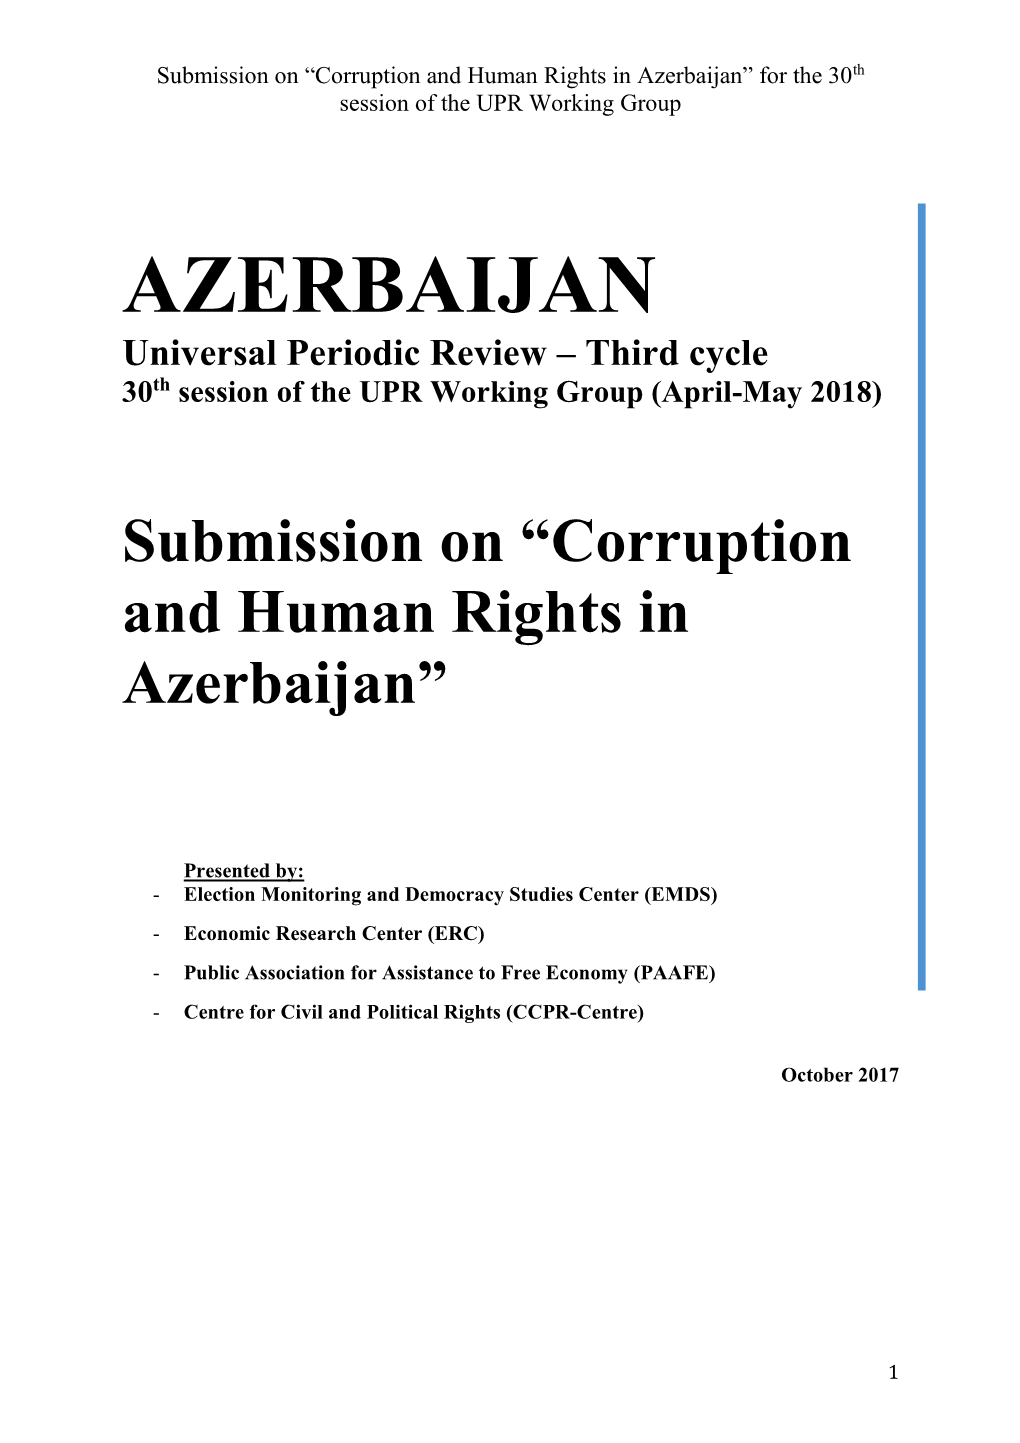 Azerbaijan” for the 30Th Session of the UPR Working Group